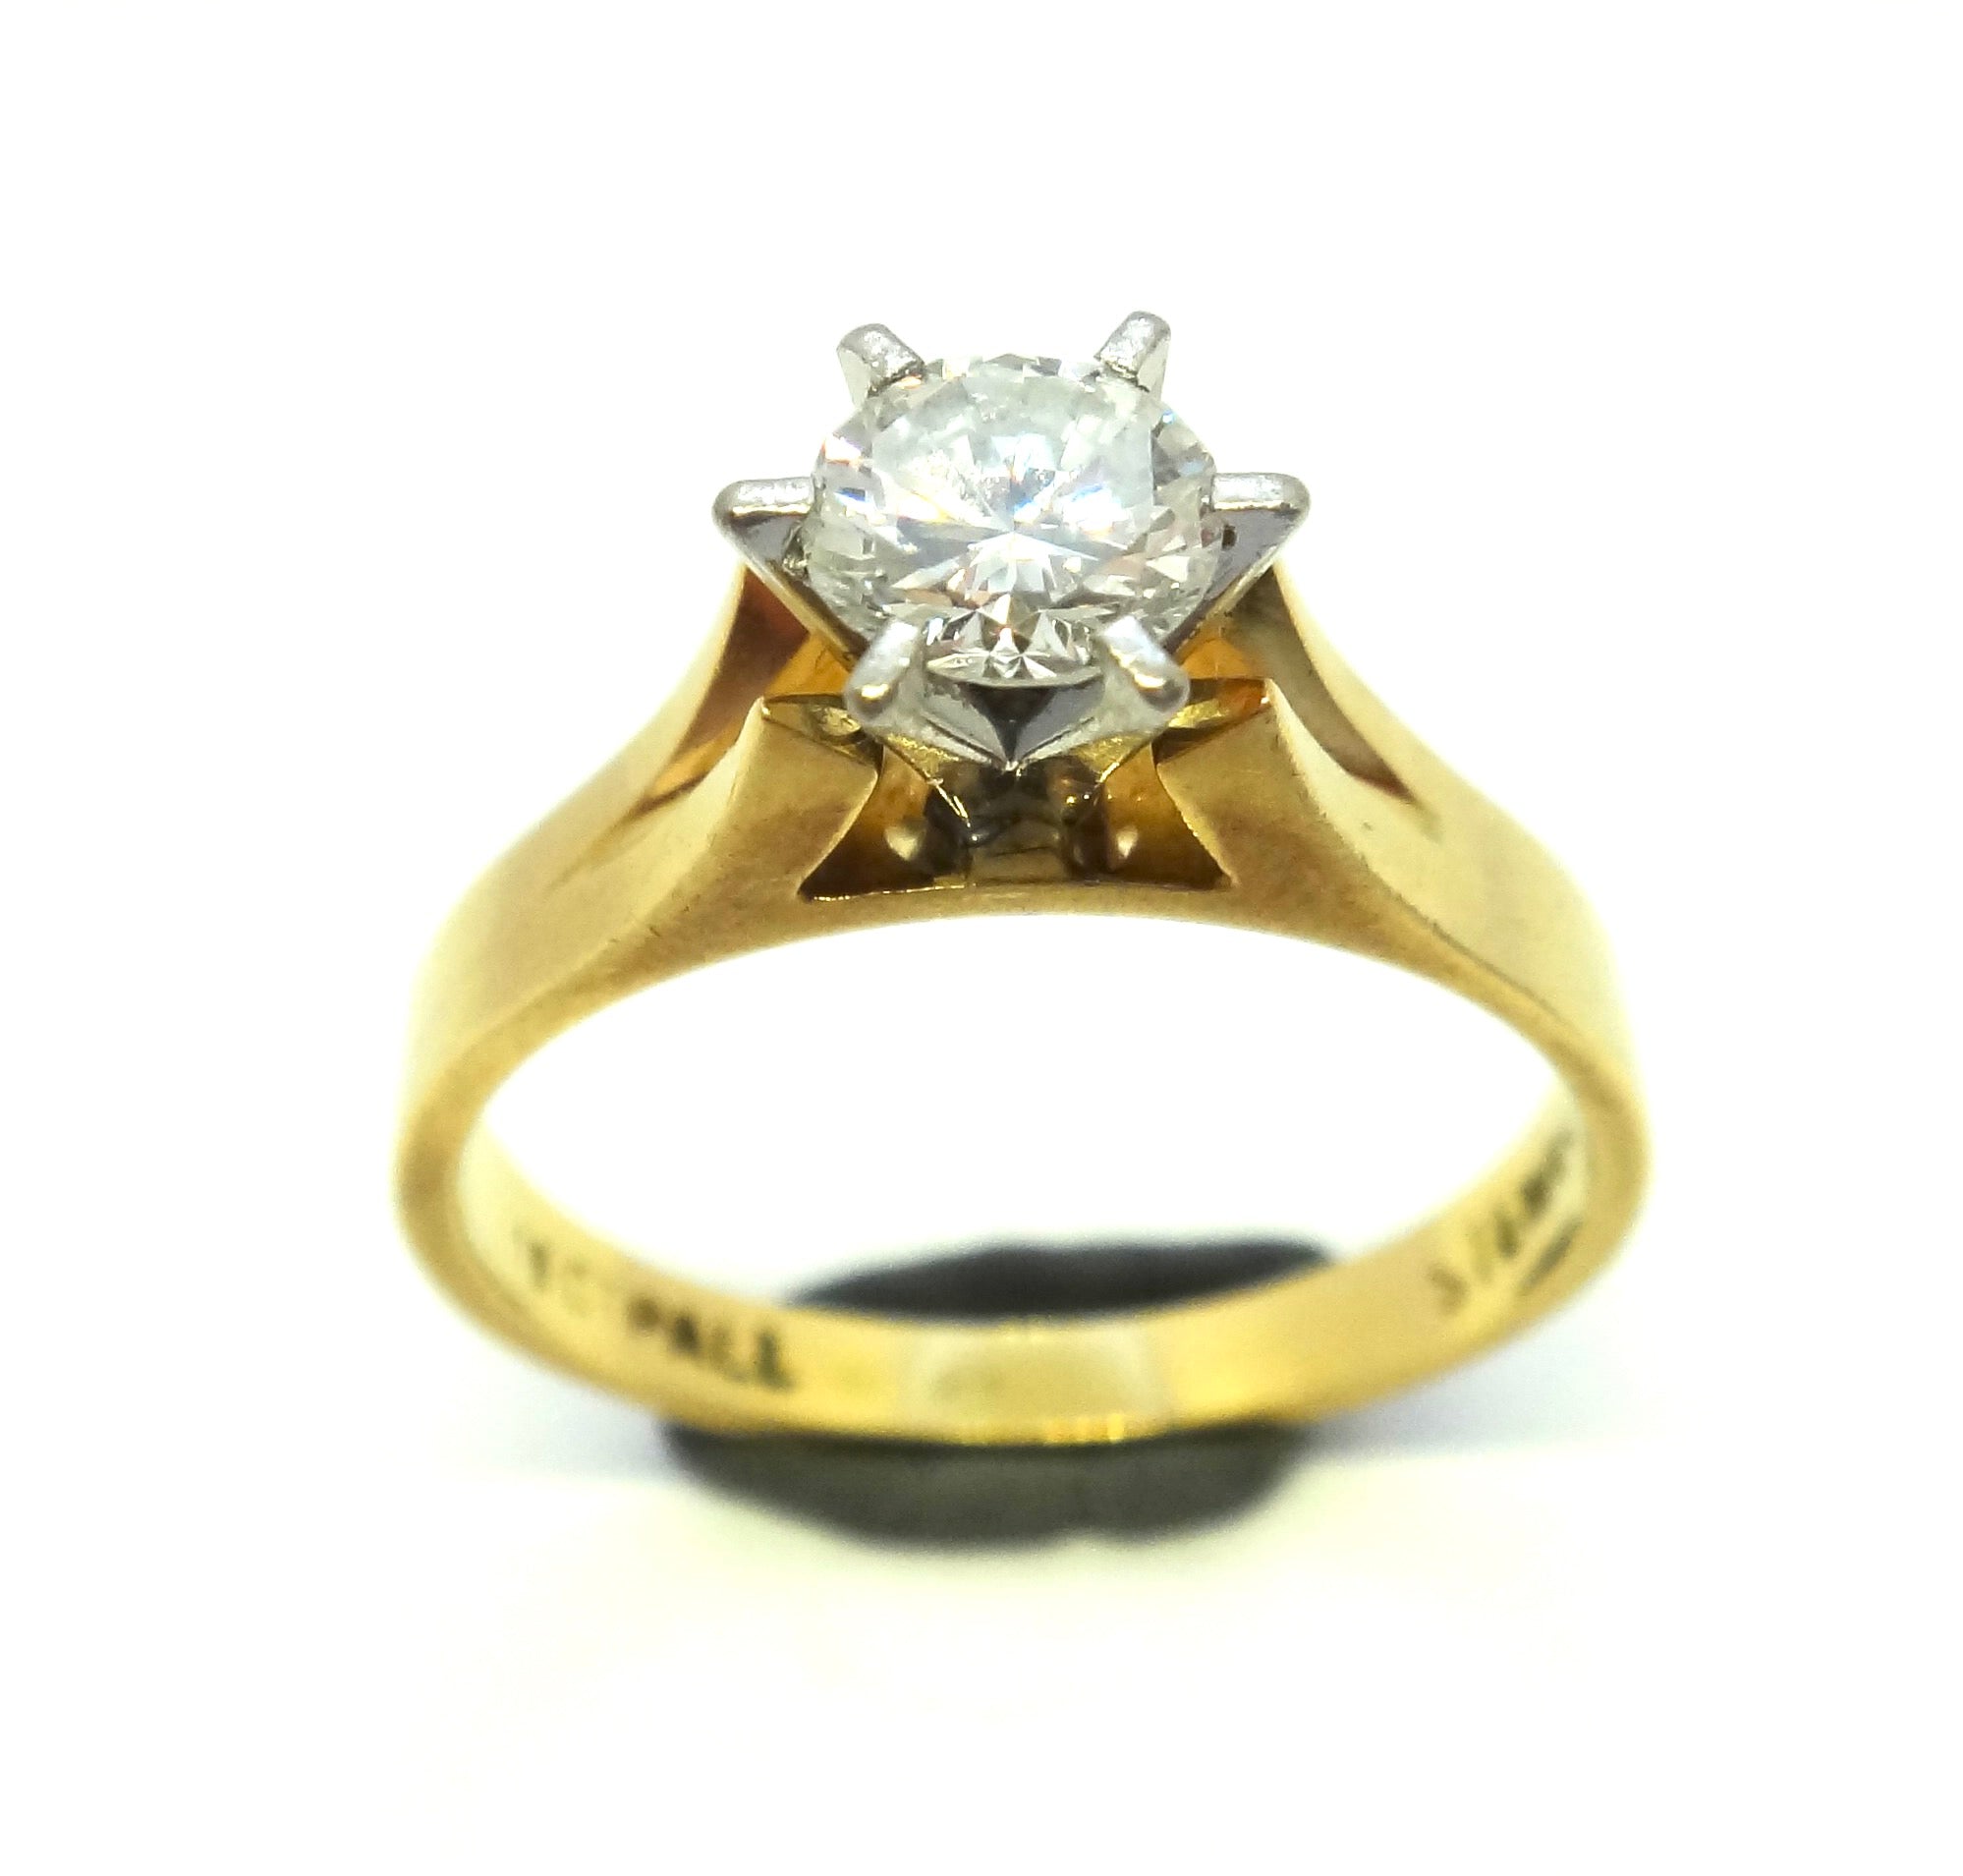 18CT Yellow GOLD & RBC Diamond Solitaire Ring VAL $4,900